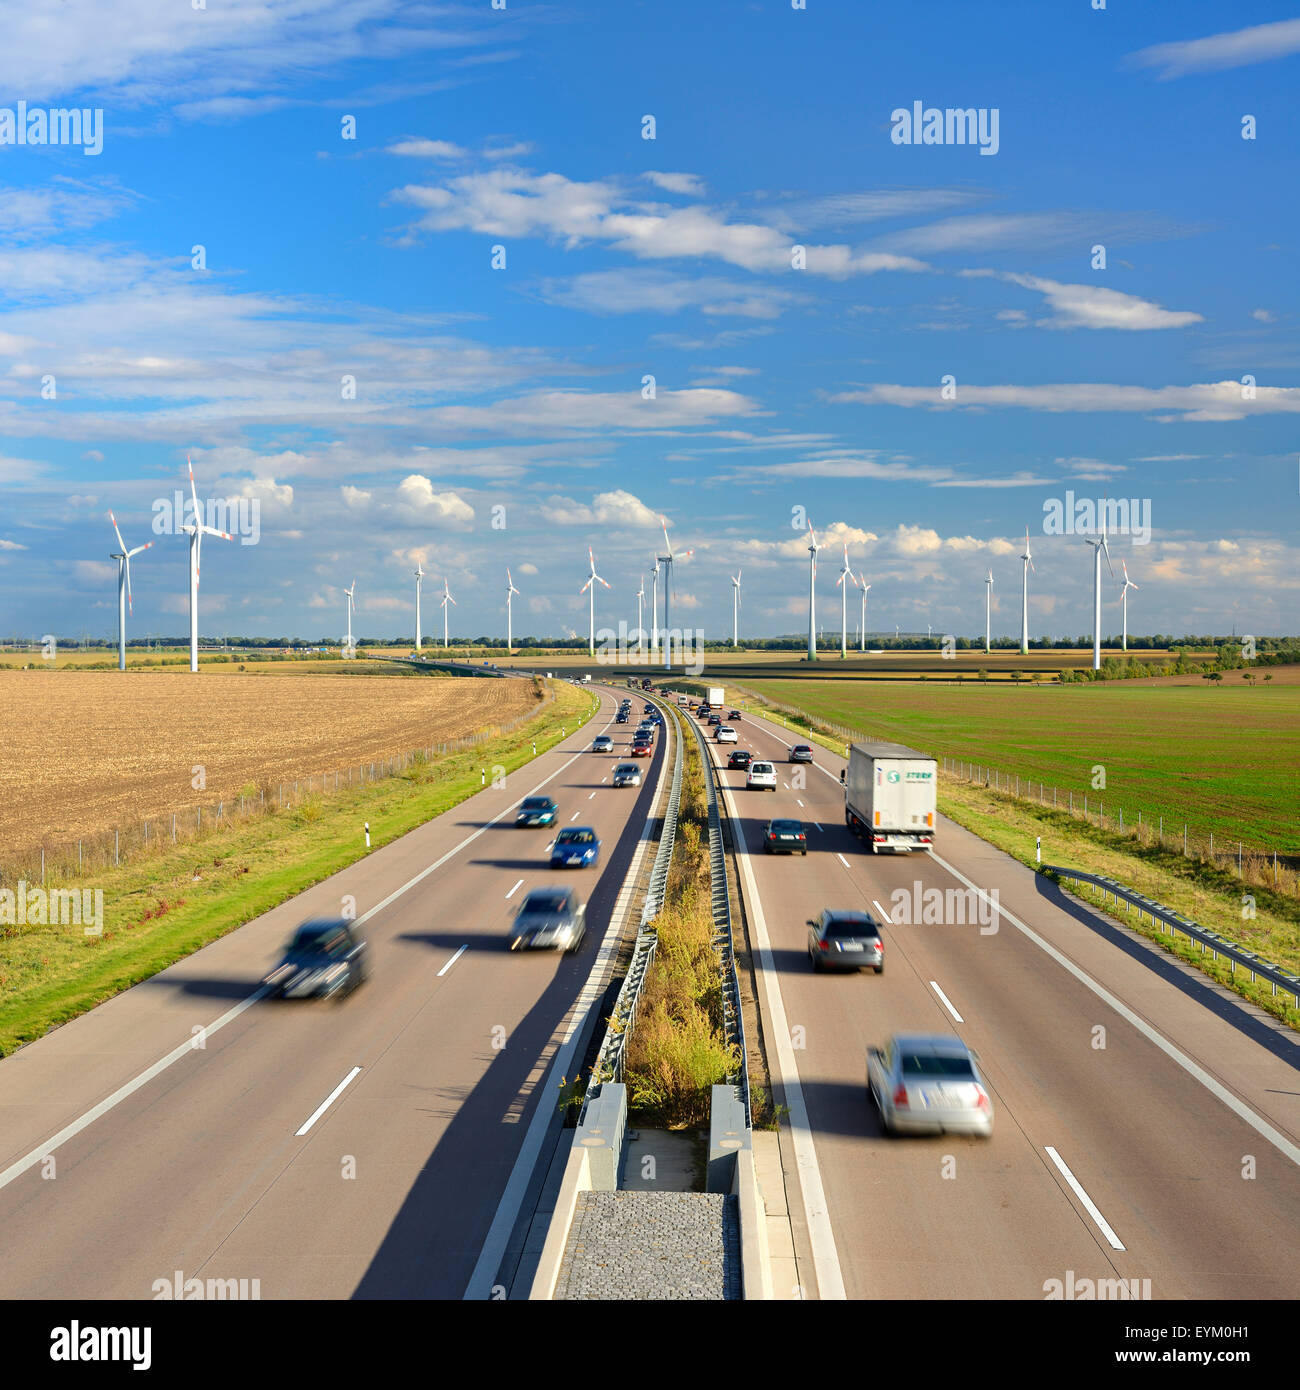 Germany, Saxony-Anhalt, highway A38 with Allstedt, Stock Photo